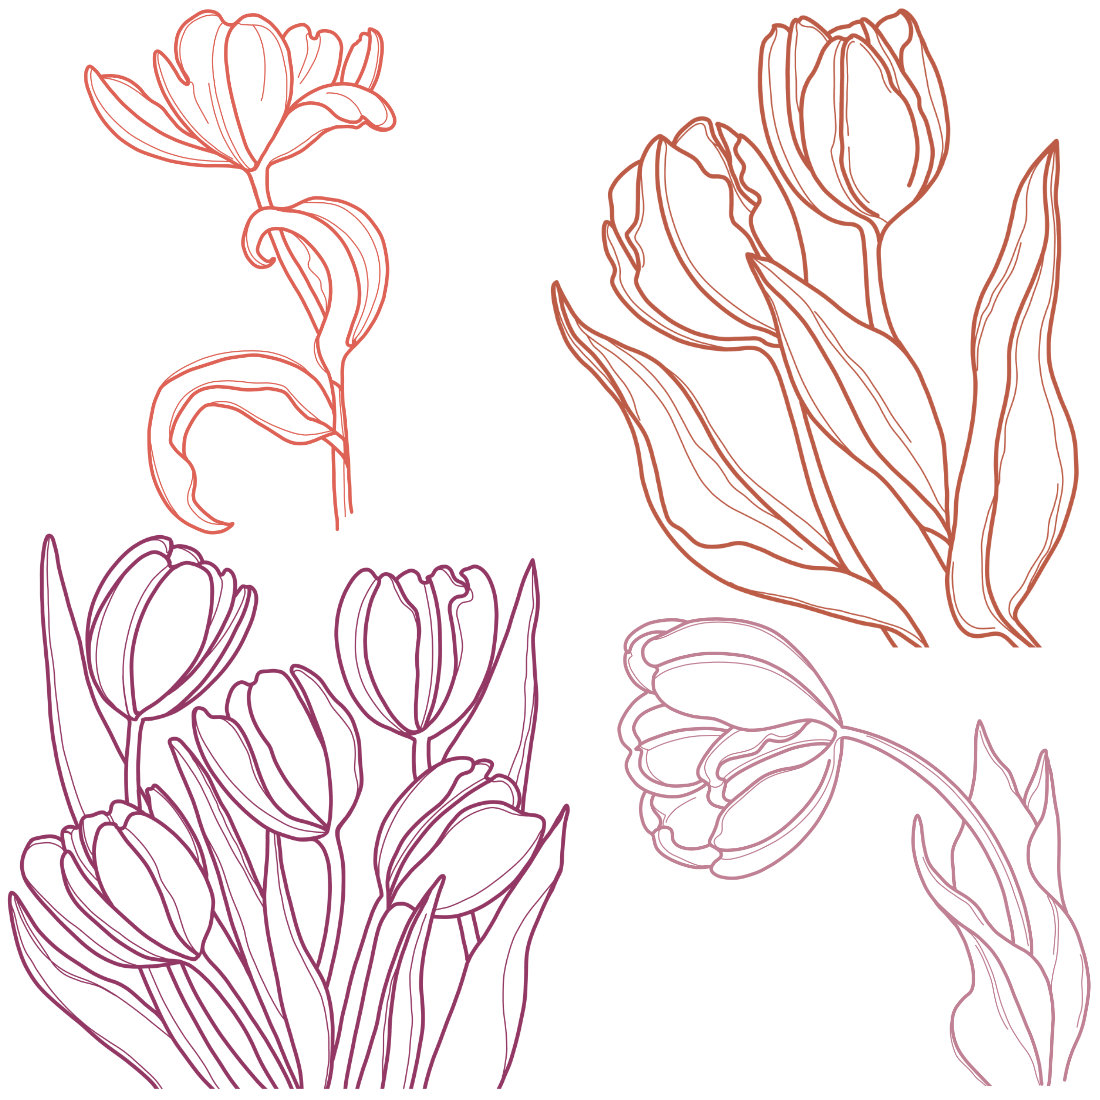 Watercolor illustrations of tulips preview image.